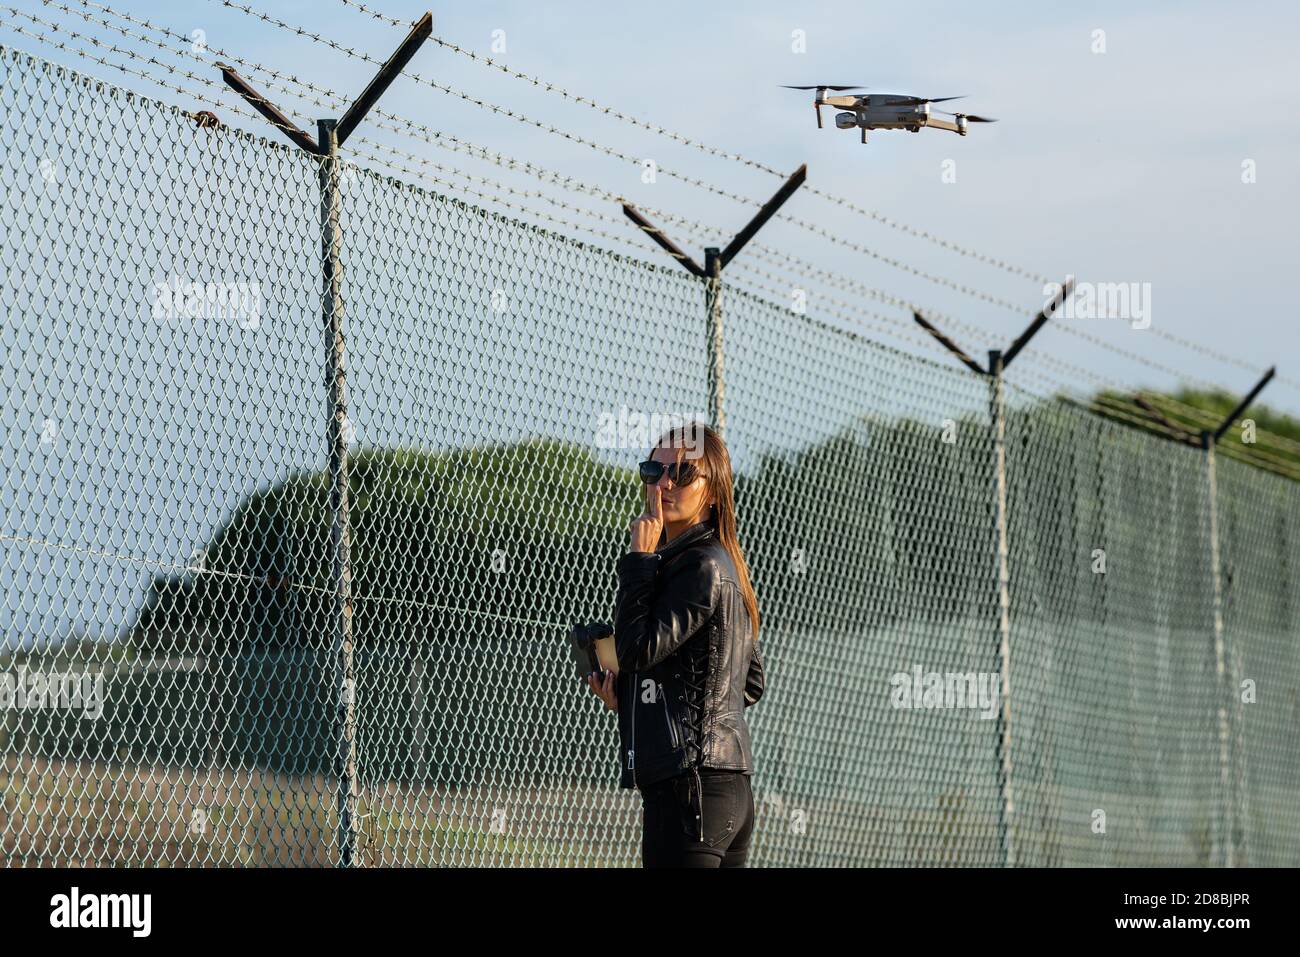 Woman flying drone in forbidden zone. Fly without a license. Fly drone near airport. Drone legislation.Drone as spy tool Stock Photo